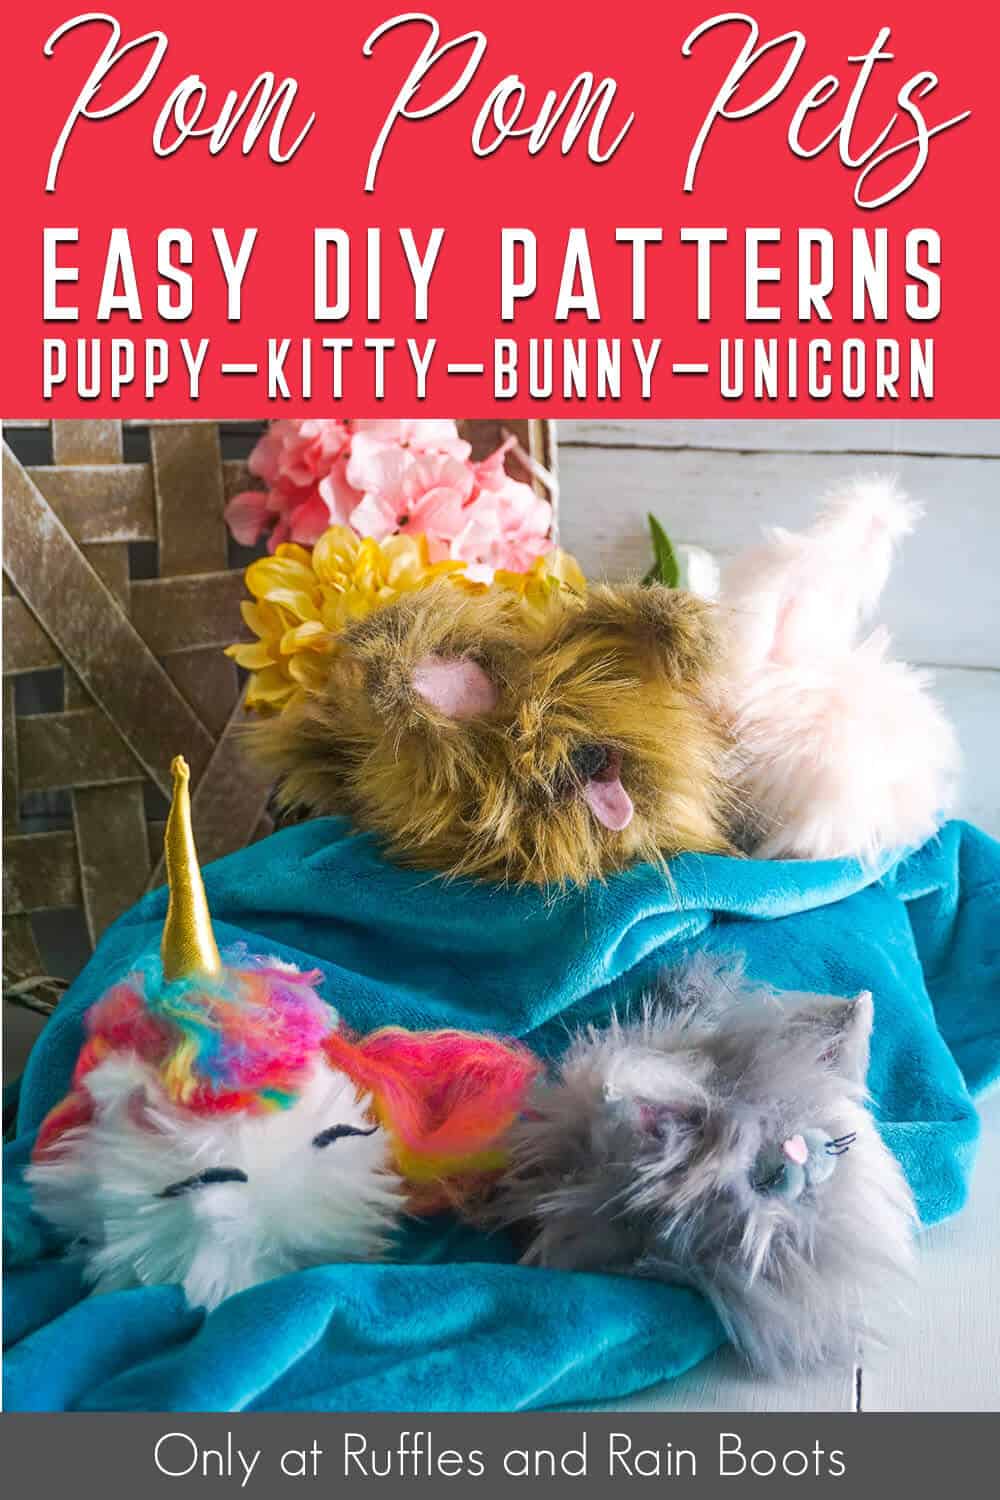 easy diy pom poms from faux fur made to look like animals with text which reads pom pom pets easy diy patterns bunny kitty puppy unicorn